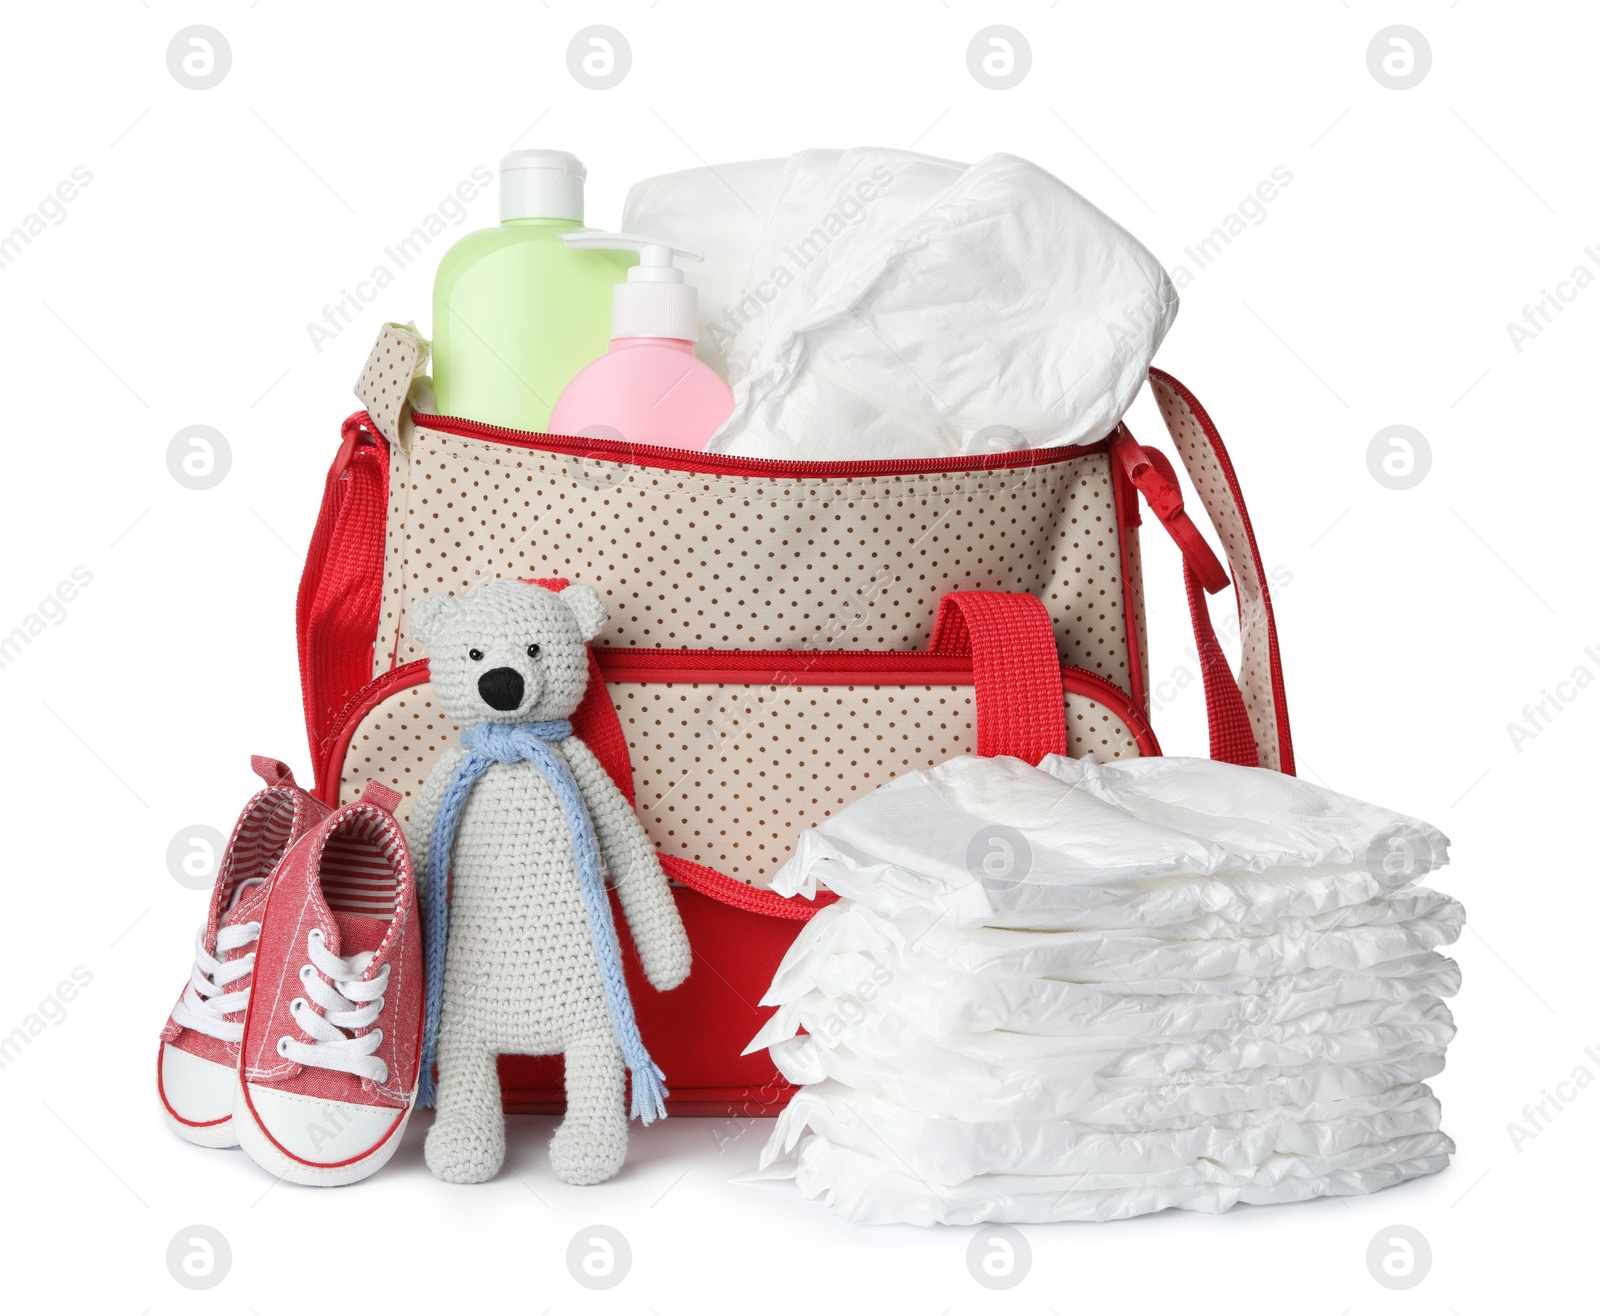 Photo of Maternity bag with disposable diapers and child's accessories on white background